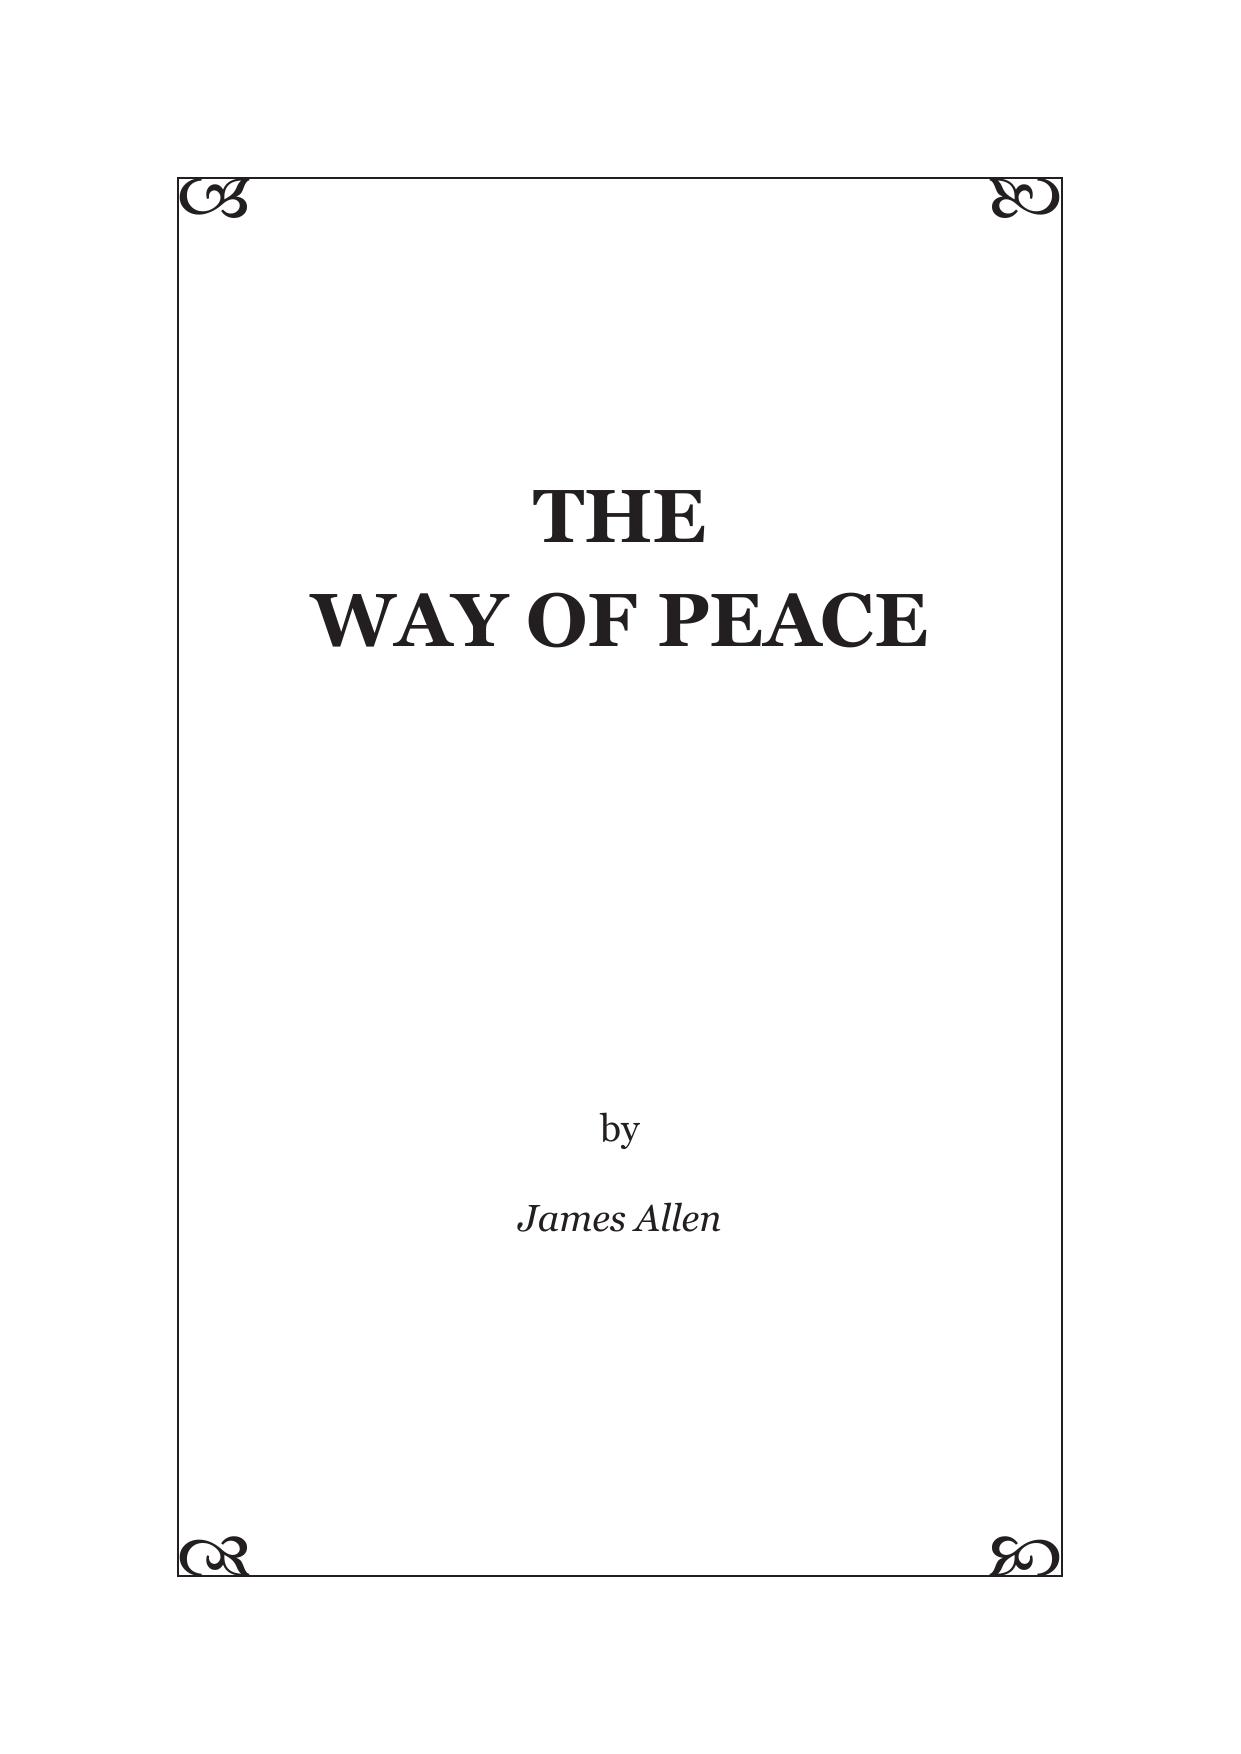 The Way of Peace by James Allen